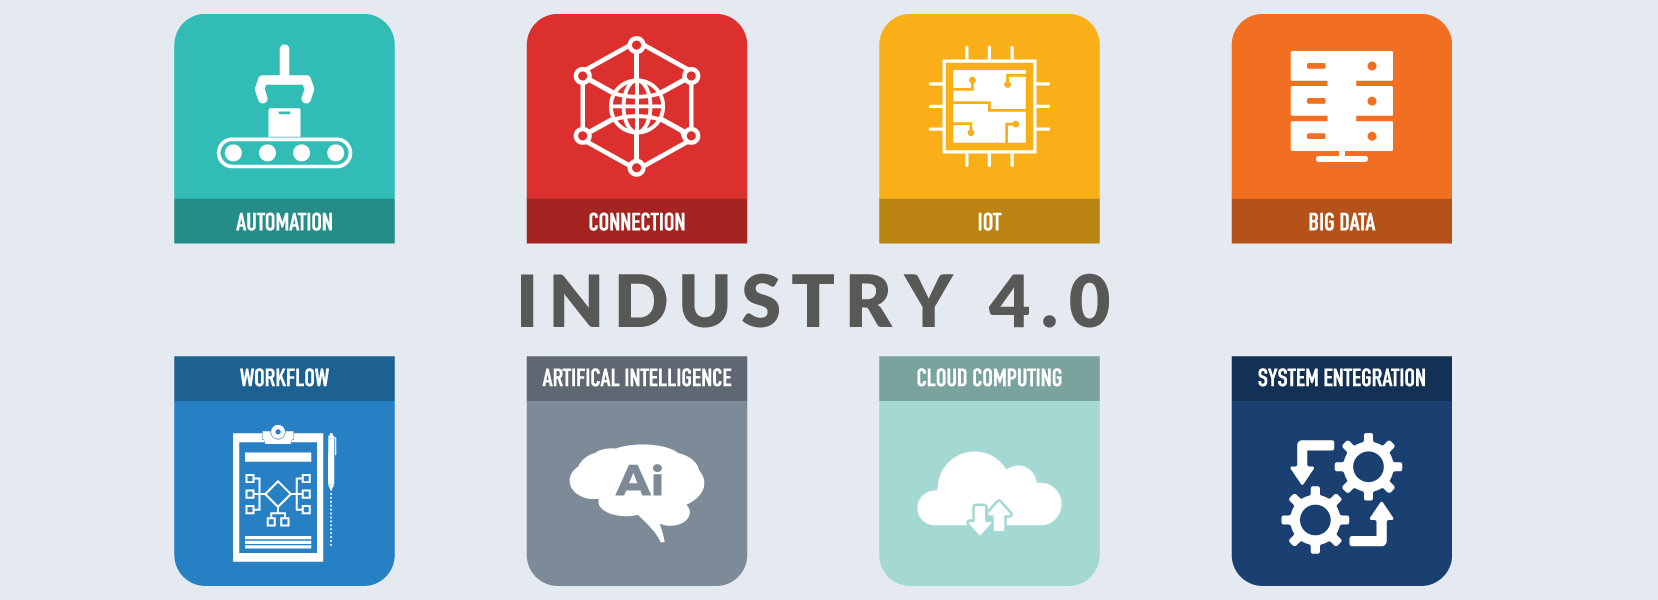 The Age of Industry 4.0 and IoT - The Era of Manufacturing Intelligence